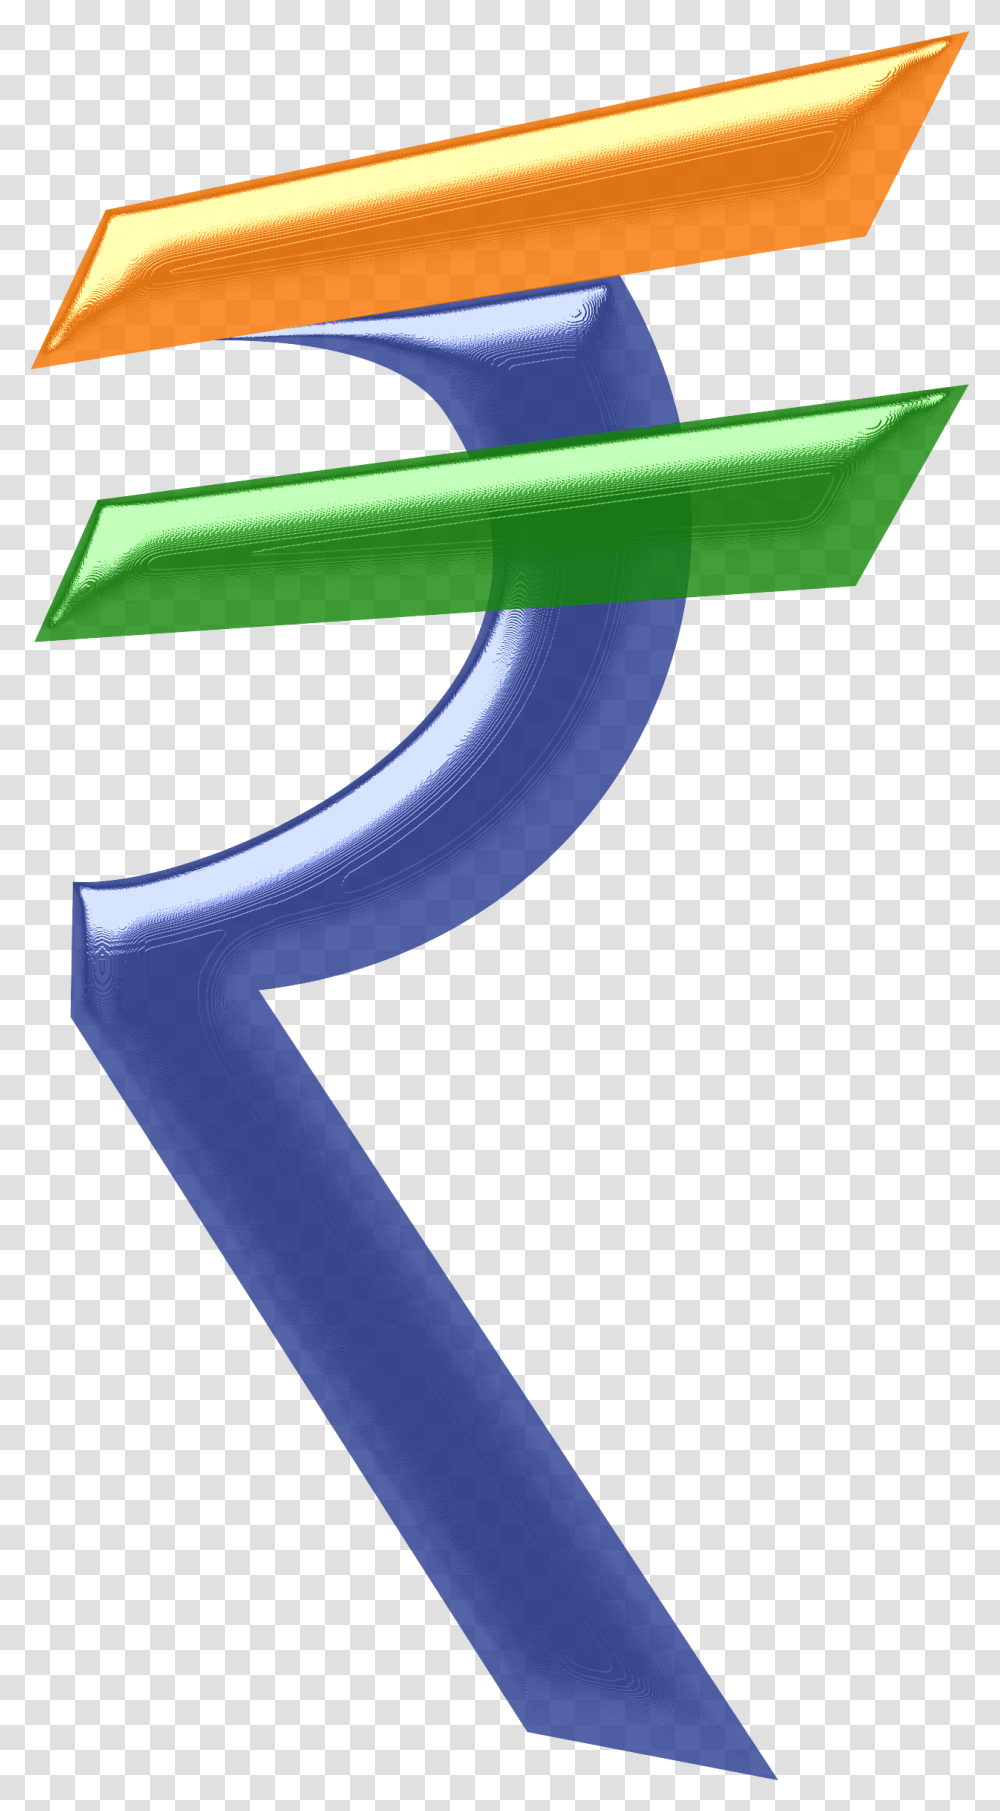 Rupee Images Free Rupees Symbol In, Handle Transparent Png